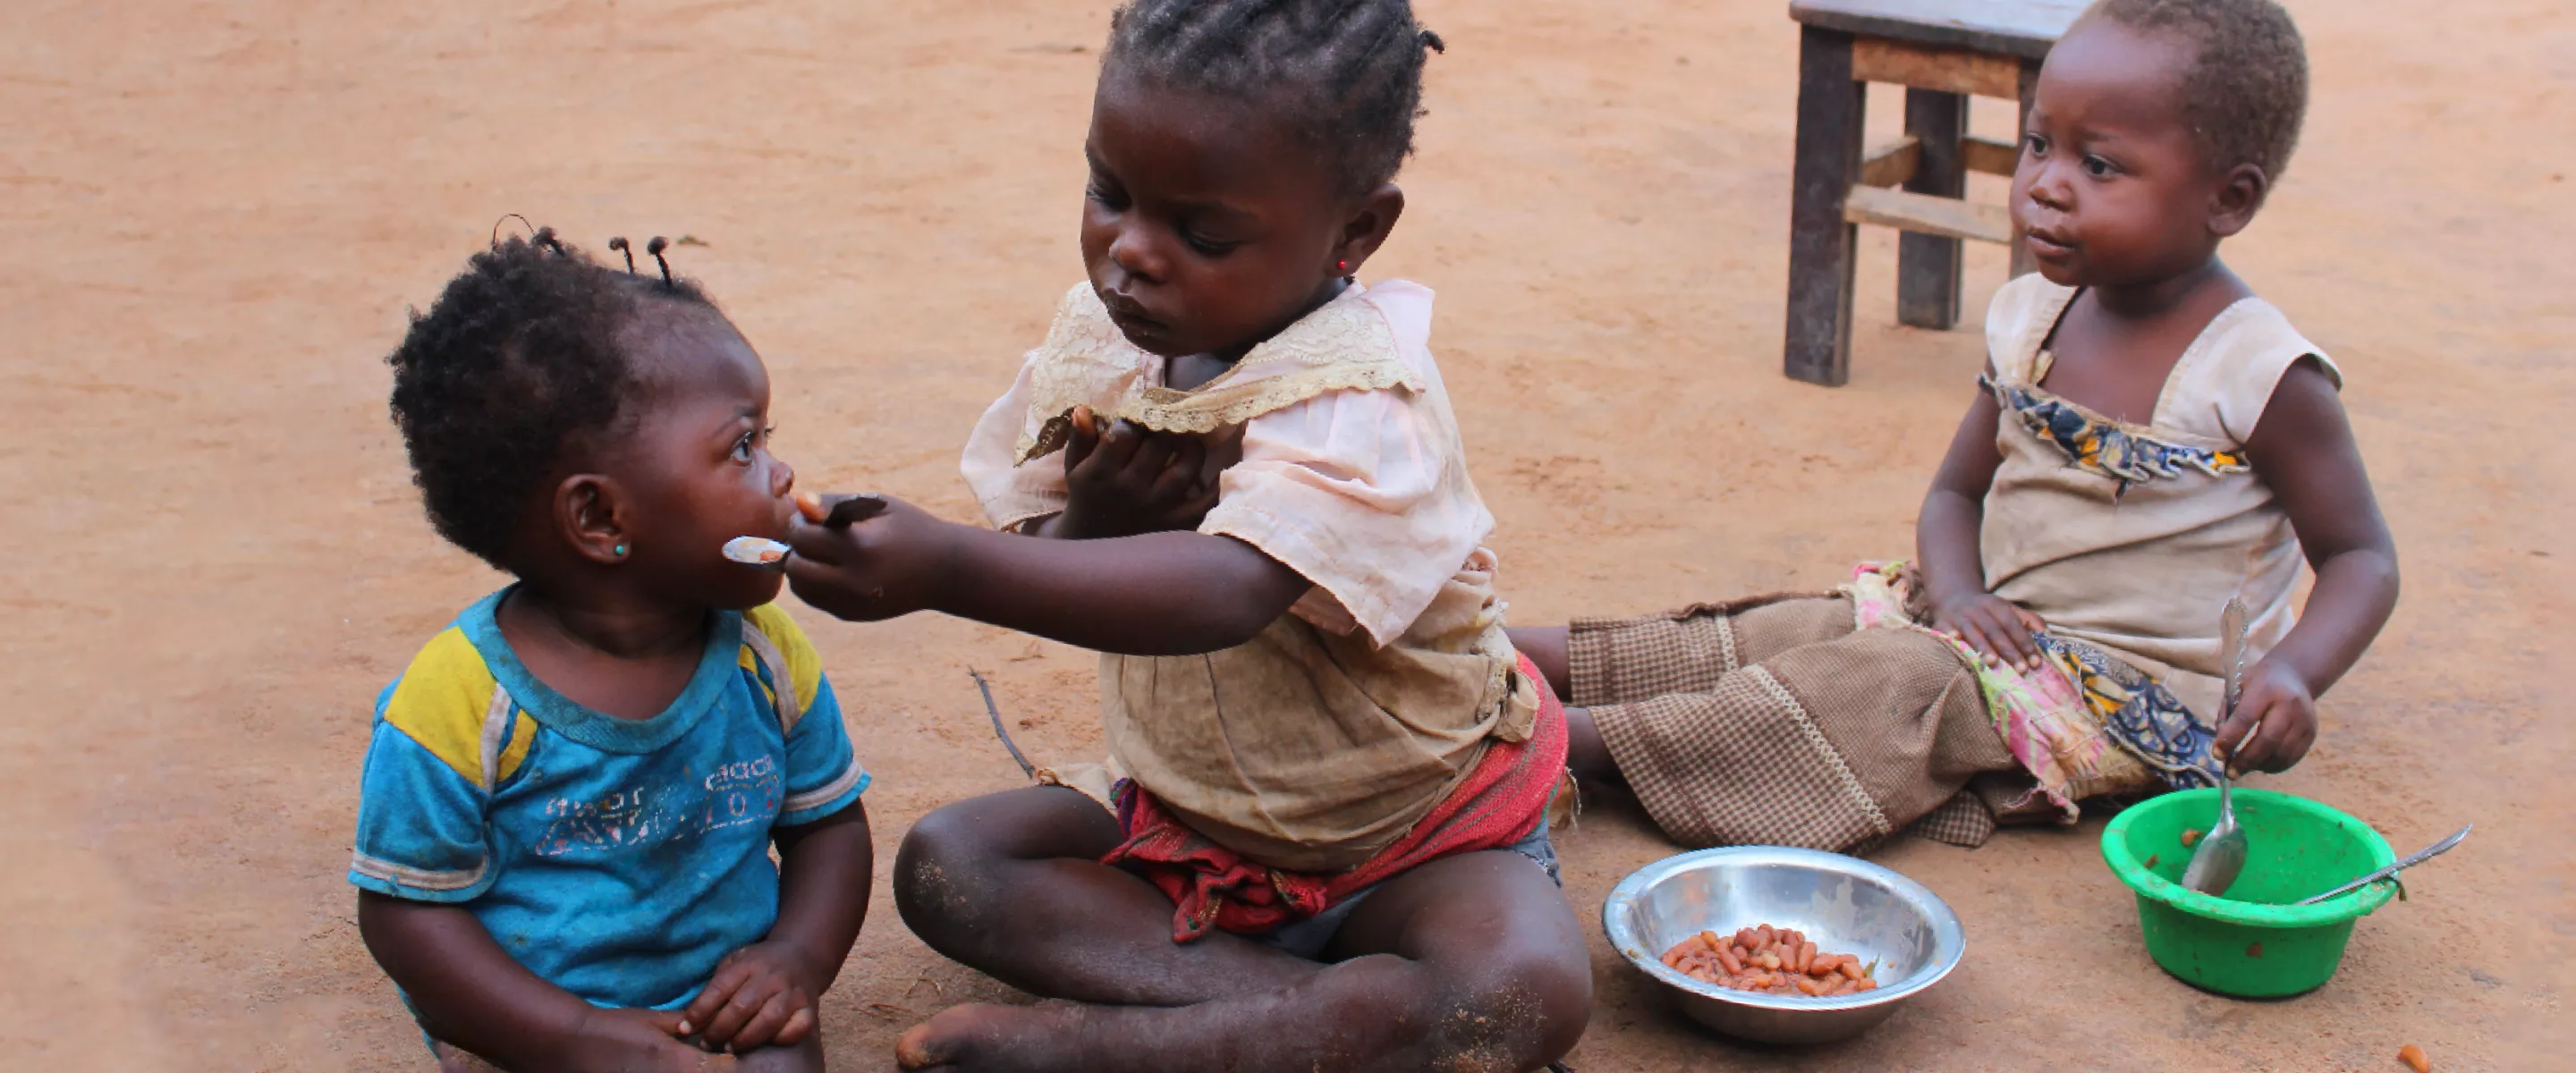 A child feeding another child.